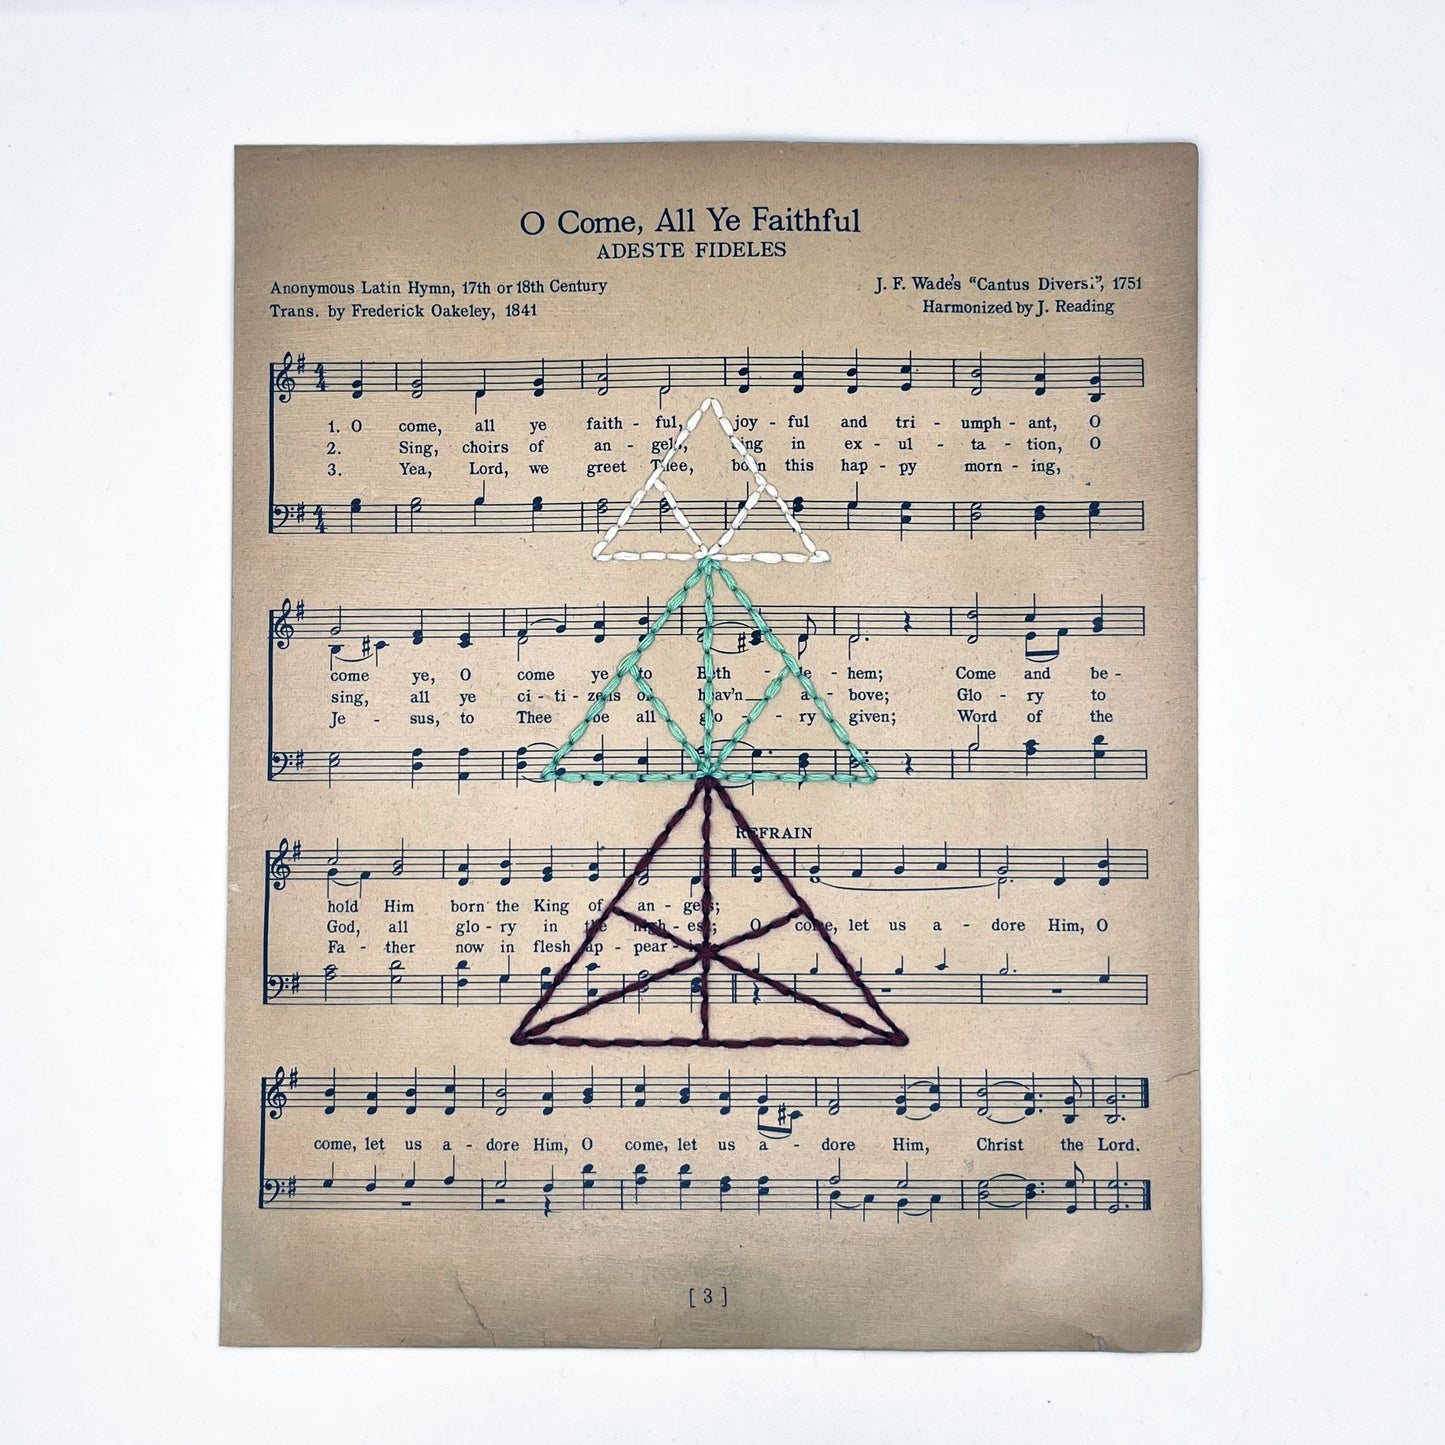 sheet music from the Christmas song O Come All Ye Faithful, hand stitched over with a Christmas tree made from triangles, in red, green and ivory thread